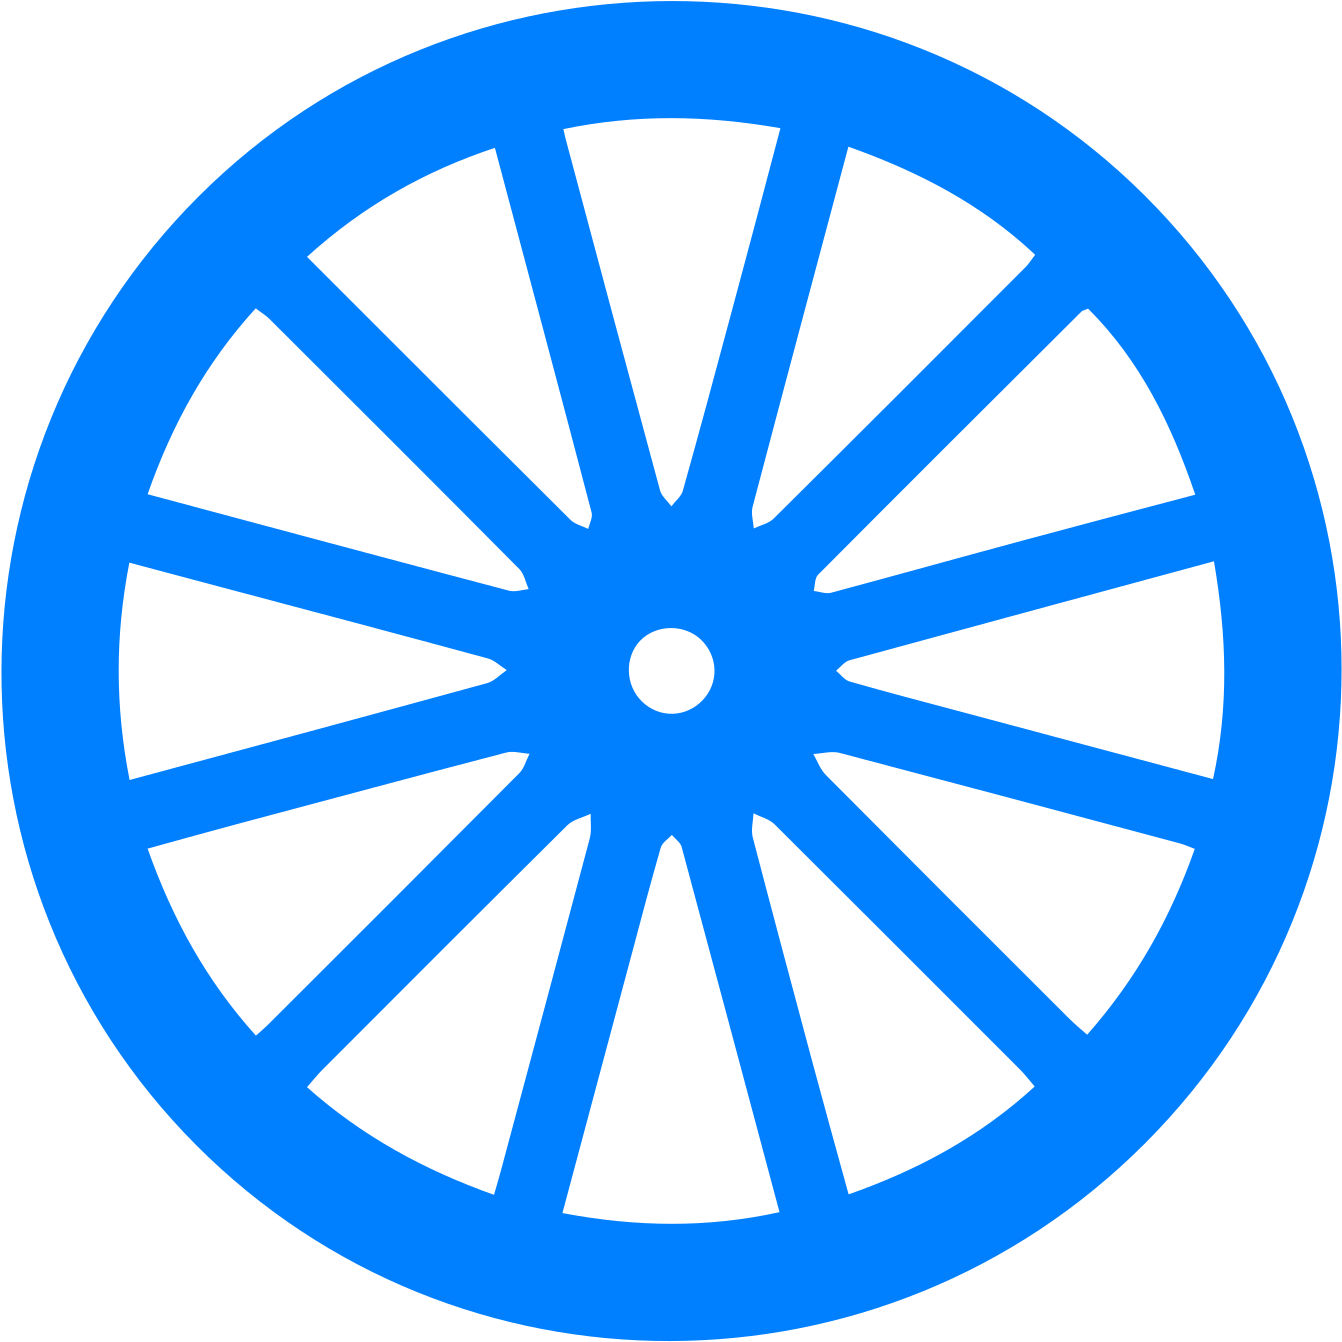 Cart Wheel - Simple Machines And Their Functions (2400x1697)